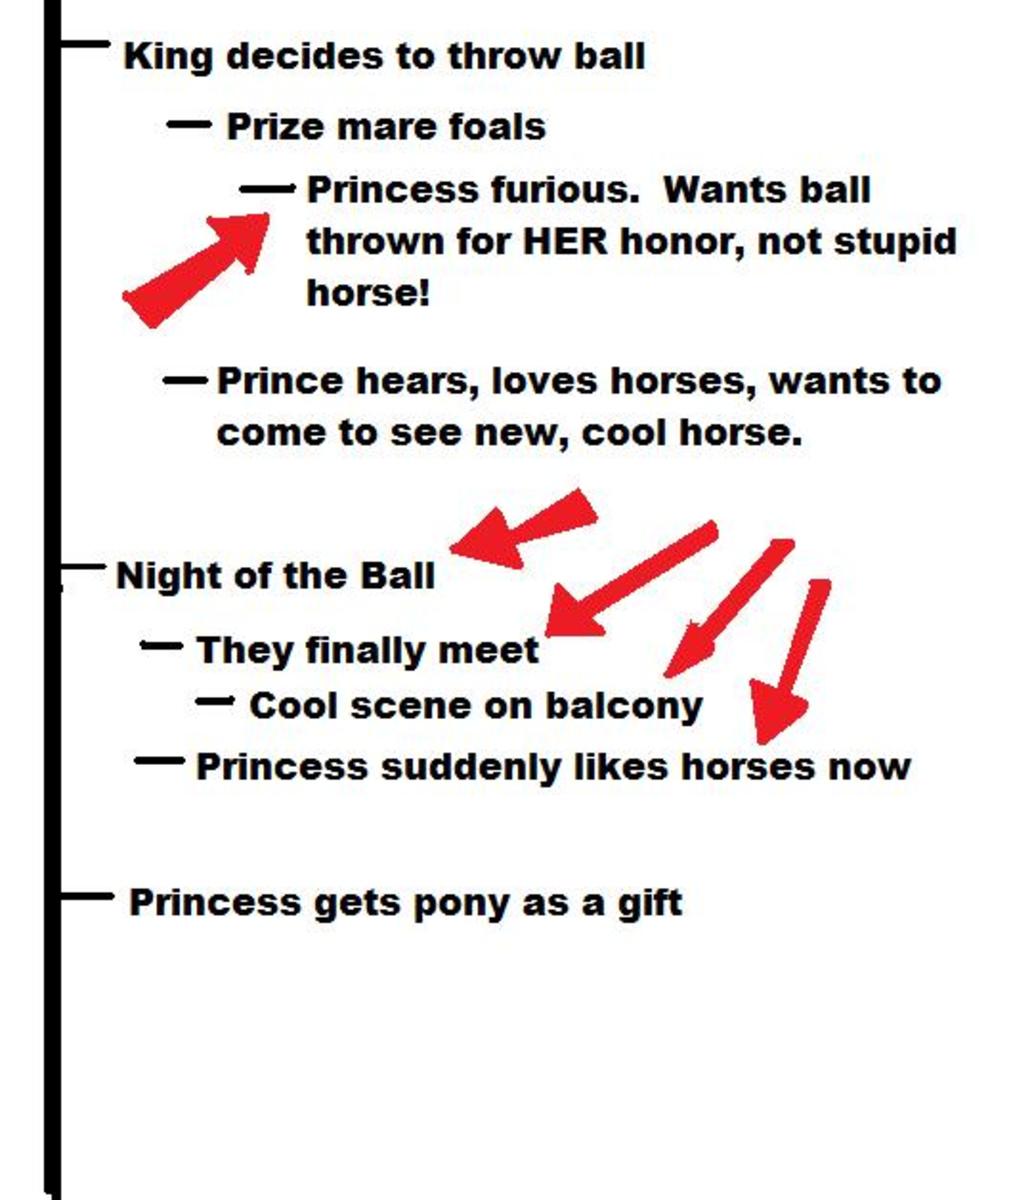 I expanded our timeline a bit and added a "Night of the Ball" too.  Let your timeline grow, it's fluid (and fun).